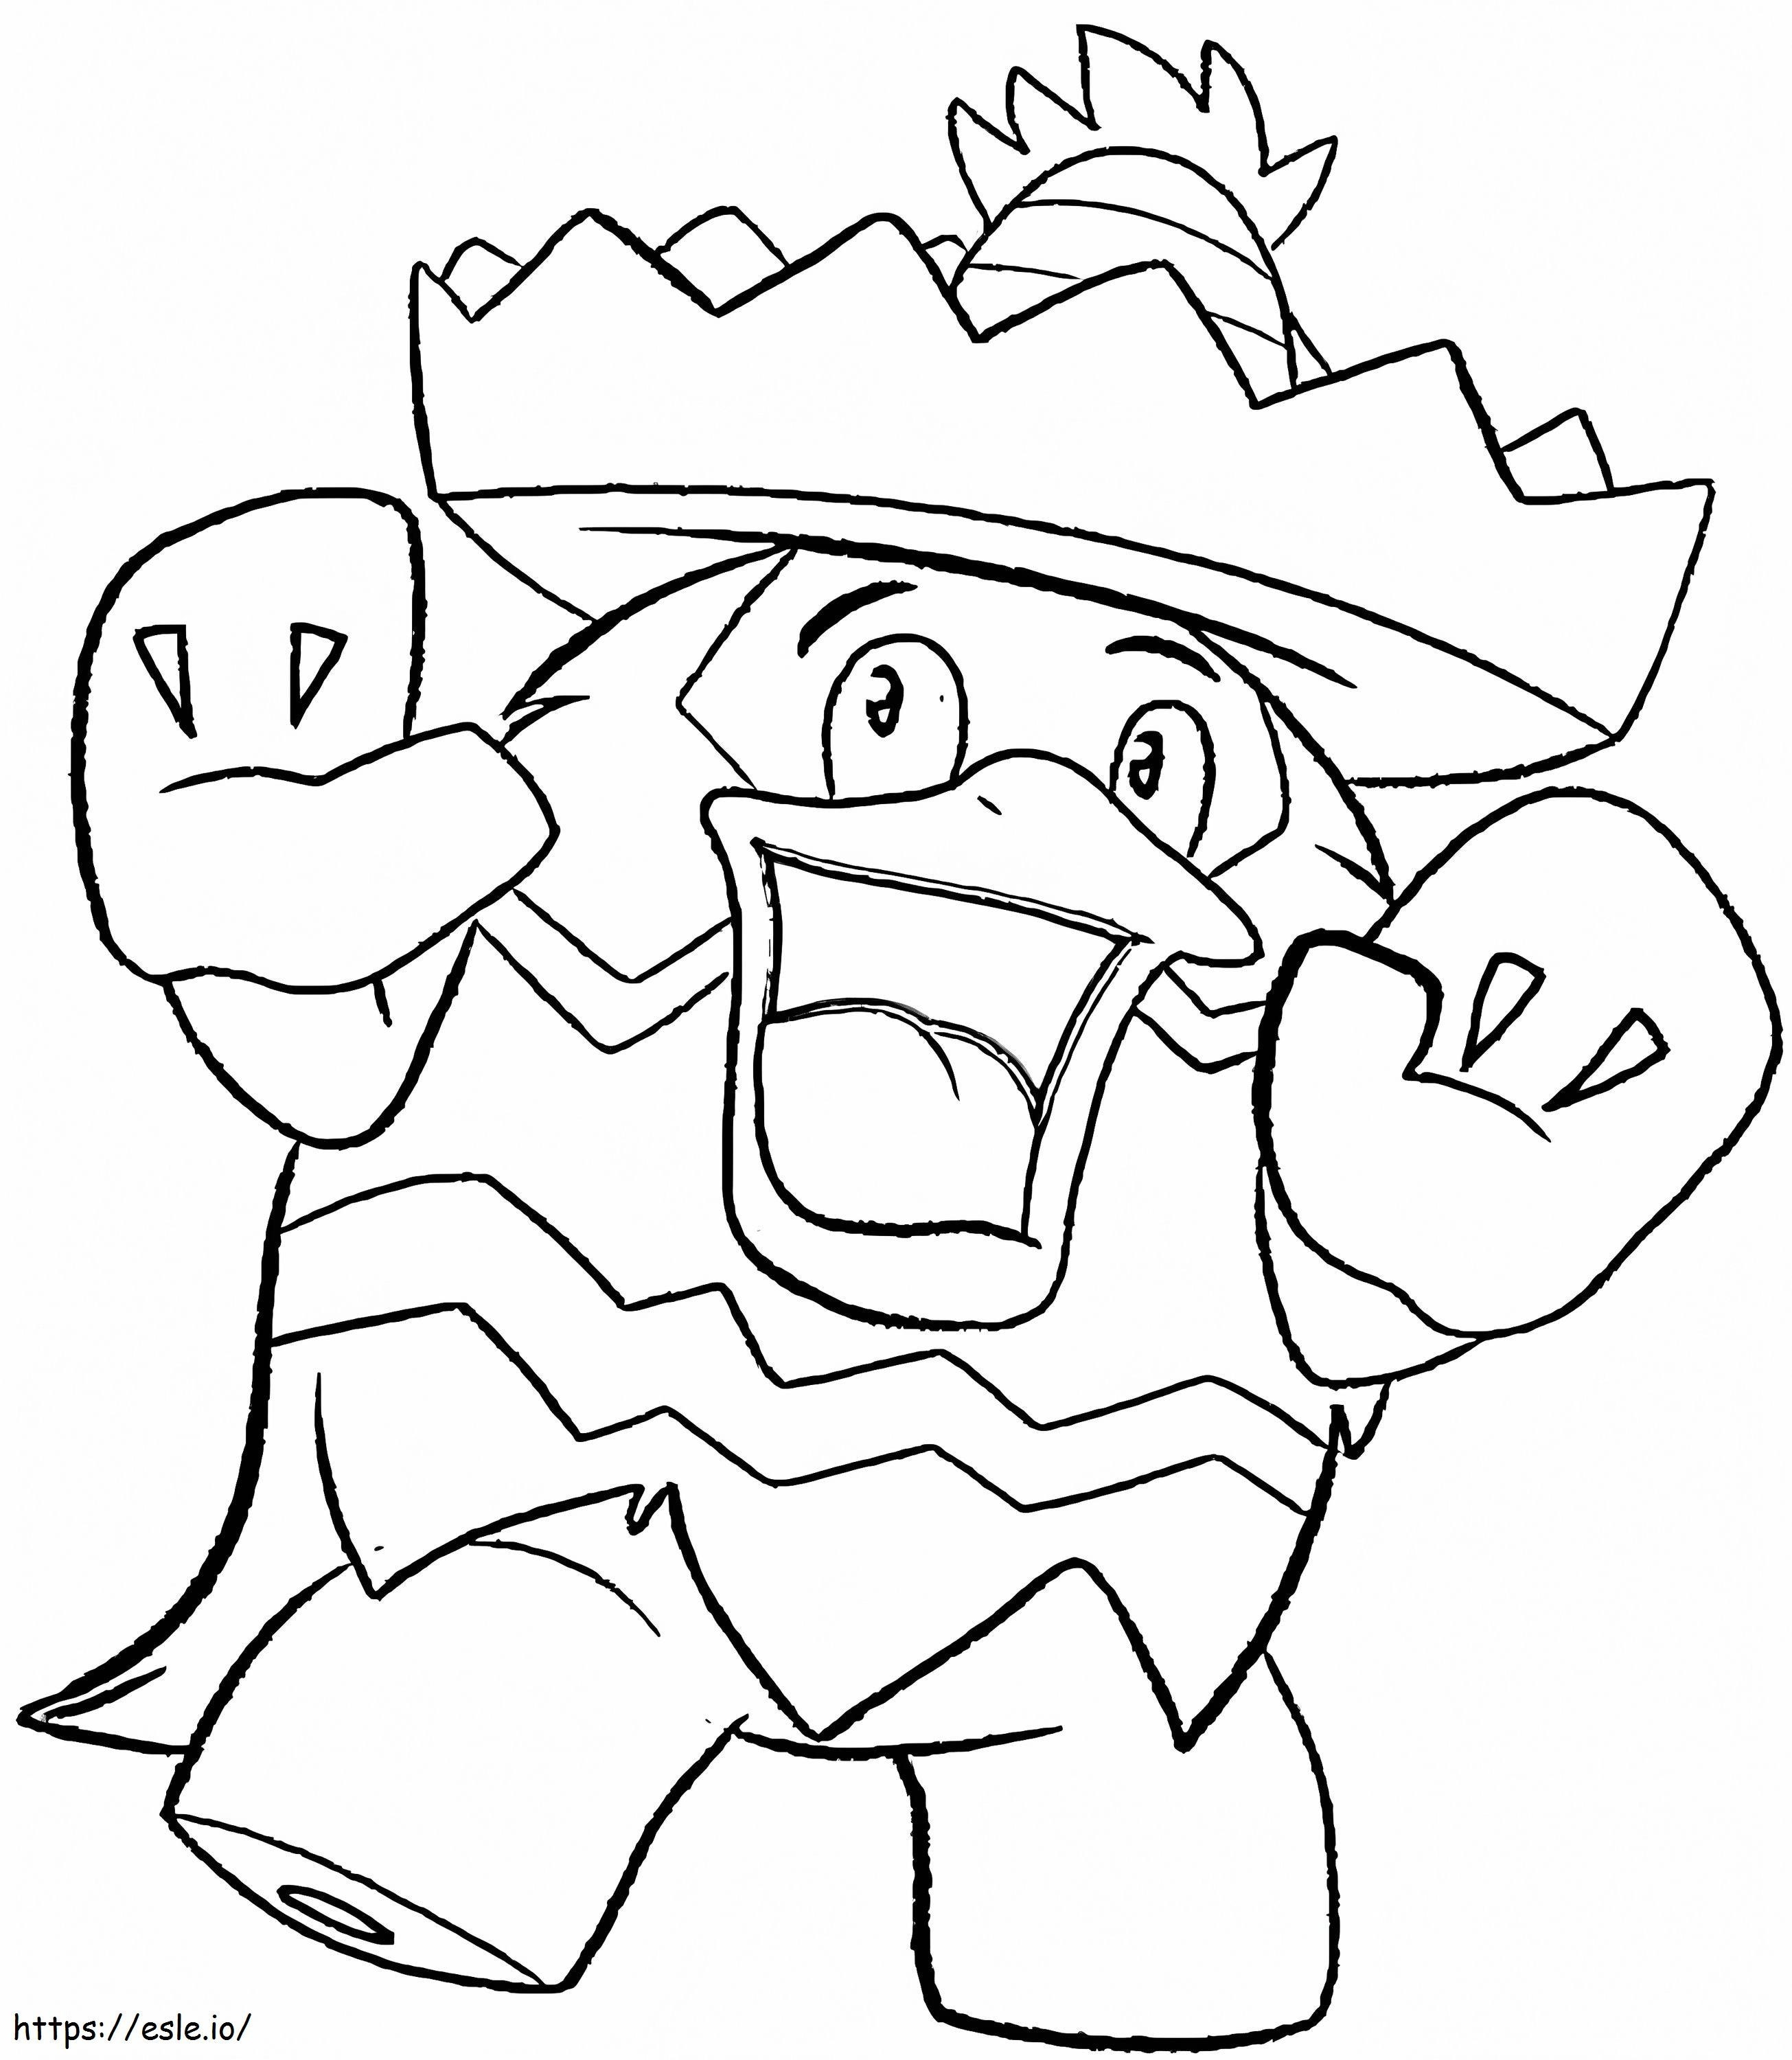 Playground 1 coloring page